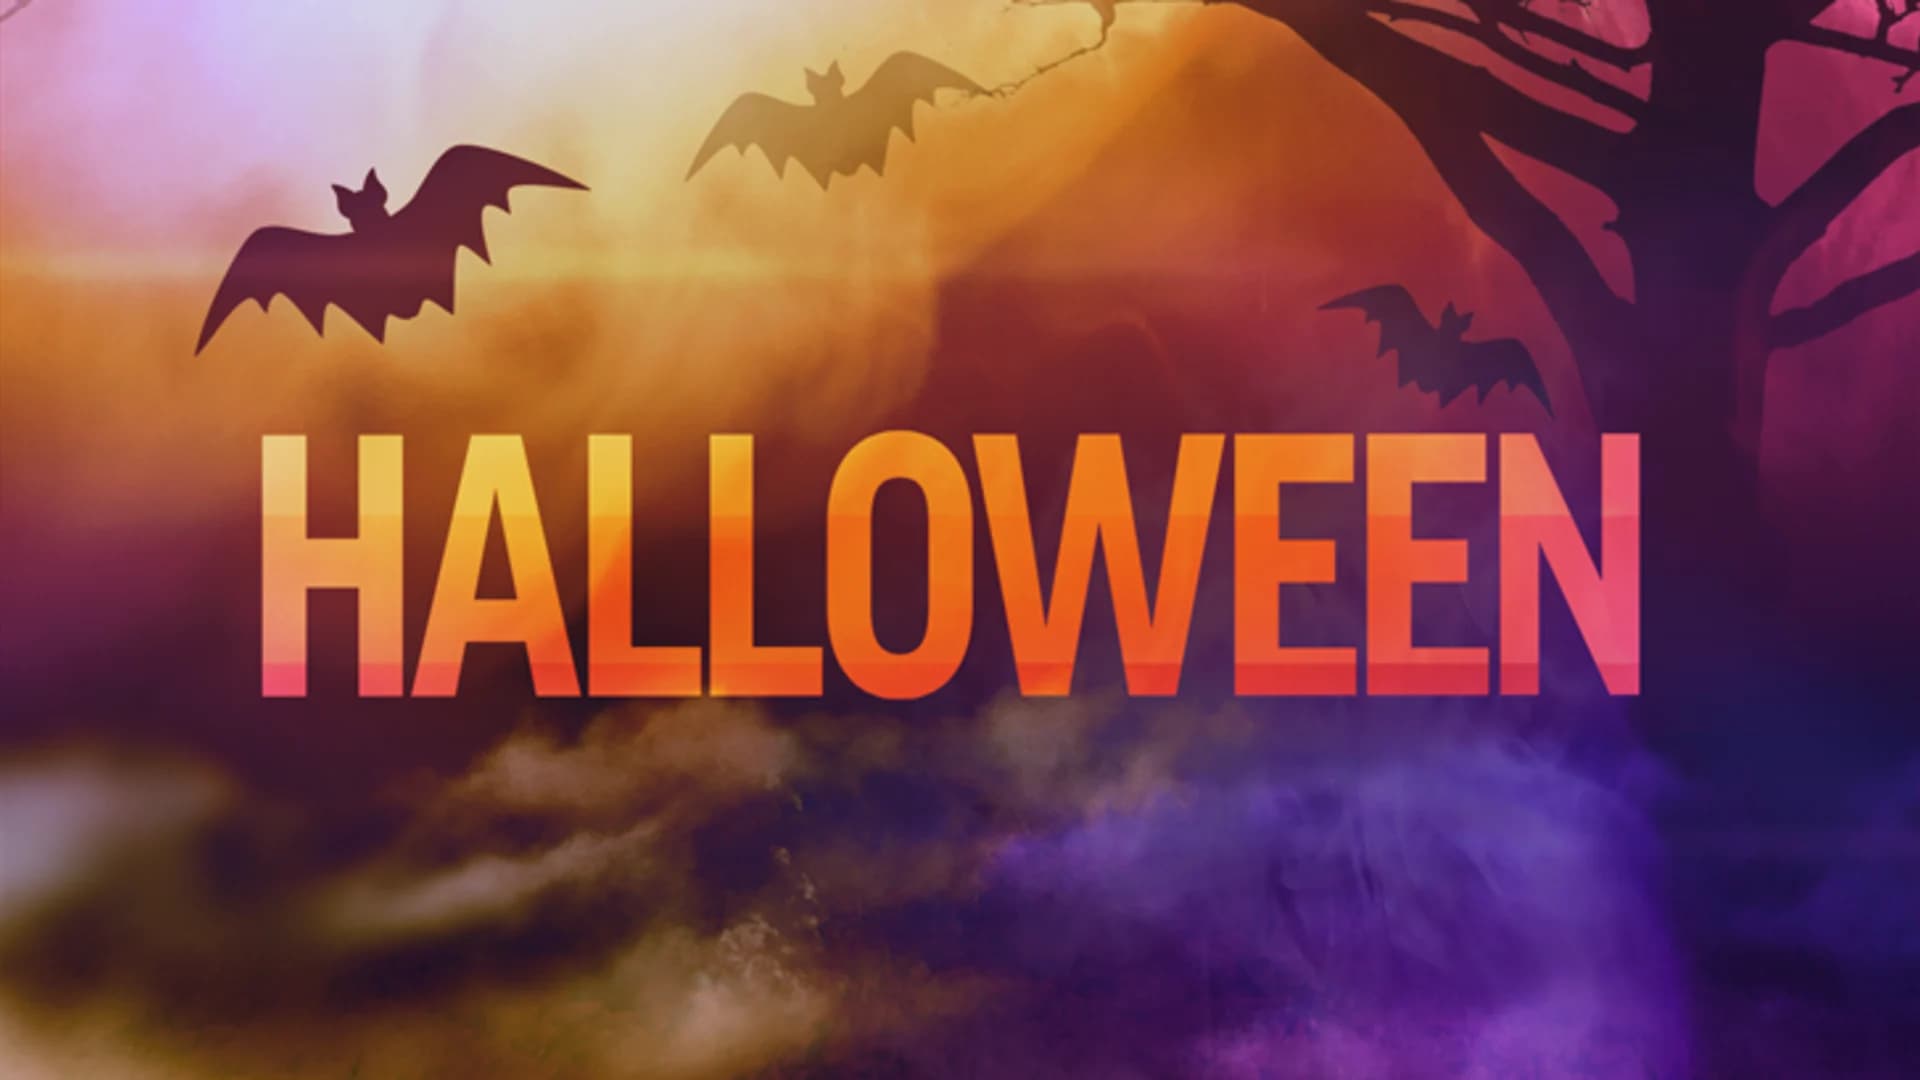 Halloween association petitions to make holiday last Saturday of October